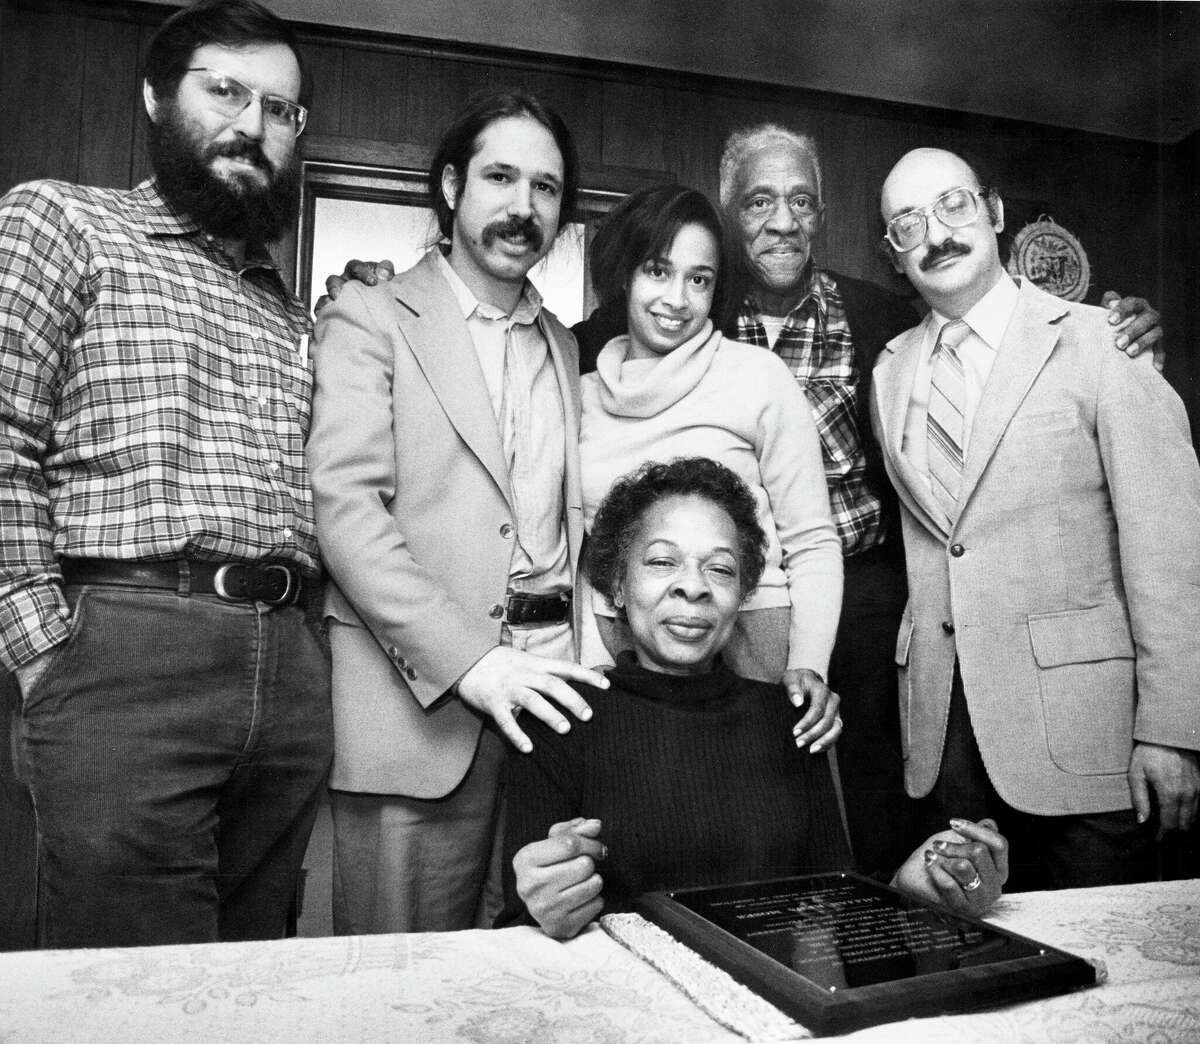 Members of the Community Health Center board of directors are shown in 1982. From left are Dr. Carl Lecce, President and CEO Mark Masselli, with members Cheryl Brown, James Moody Sr. and Gerry Weitzman.